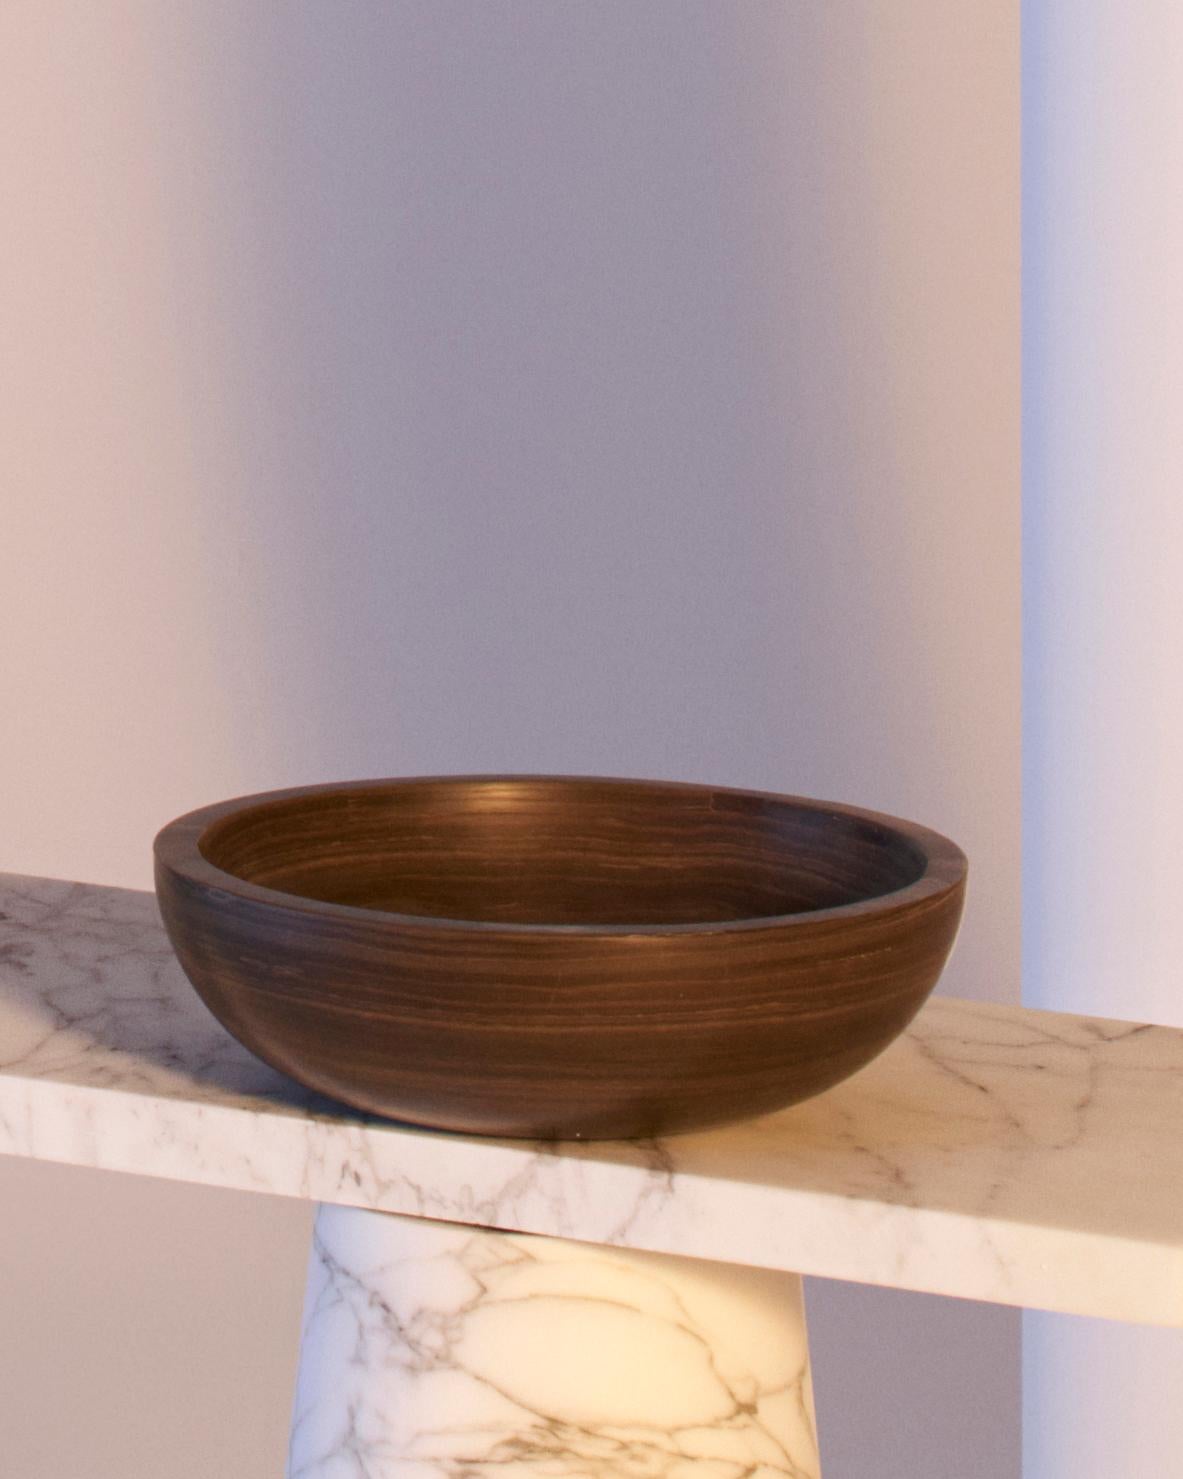 Inside Out Fruit Bowl in Tobacco Brown marble, designed by the internationally renowned designer Karen Chekerdjian - it is available also in other colours.
It is part of the Inside Out Collection - tables and accessories (fruit bowls, candles